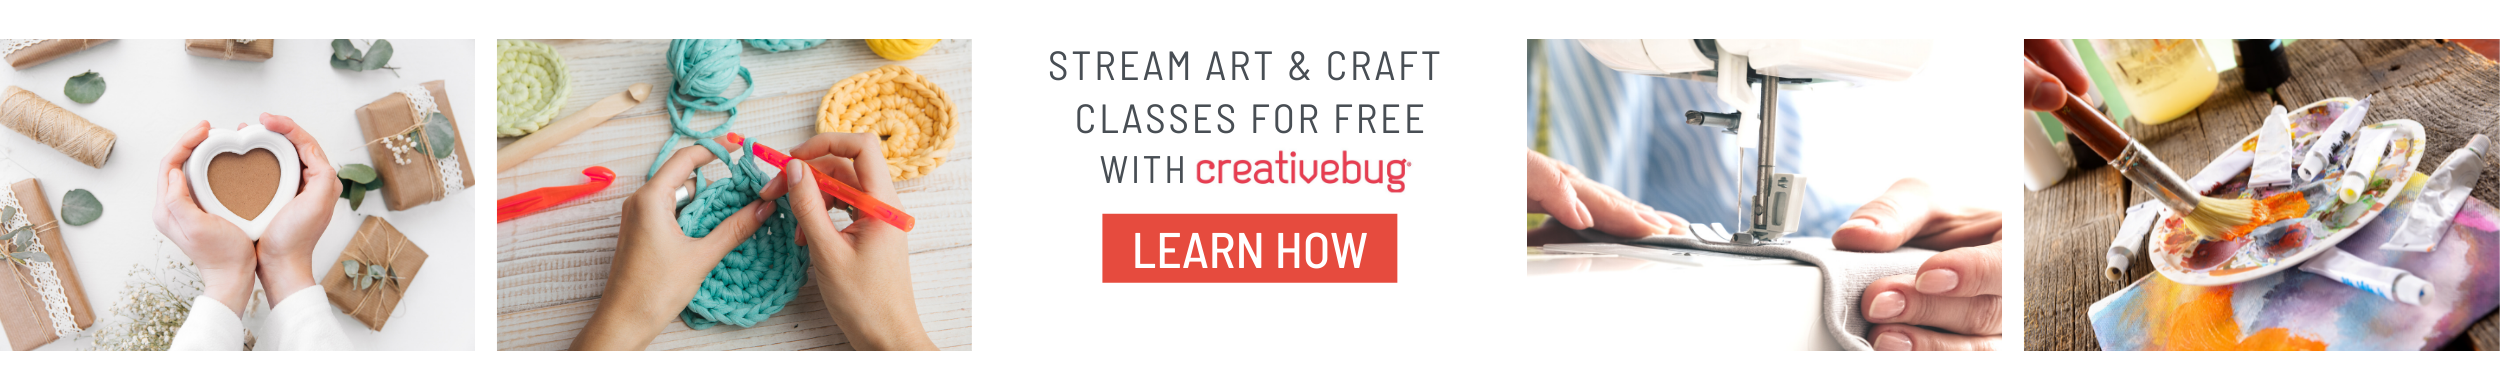 Stream art and craft classes for free with Creativebug. Learn How 